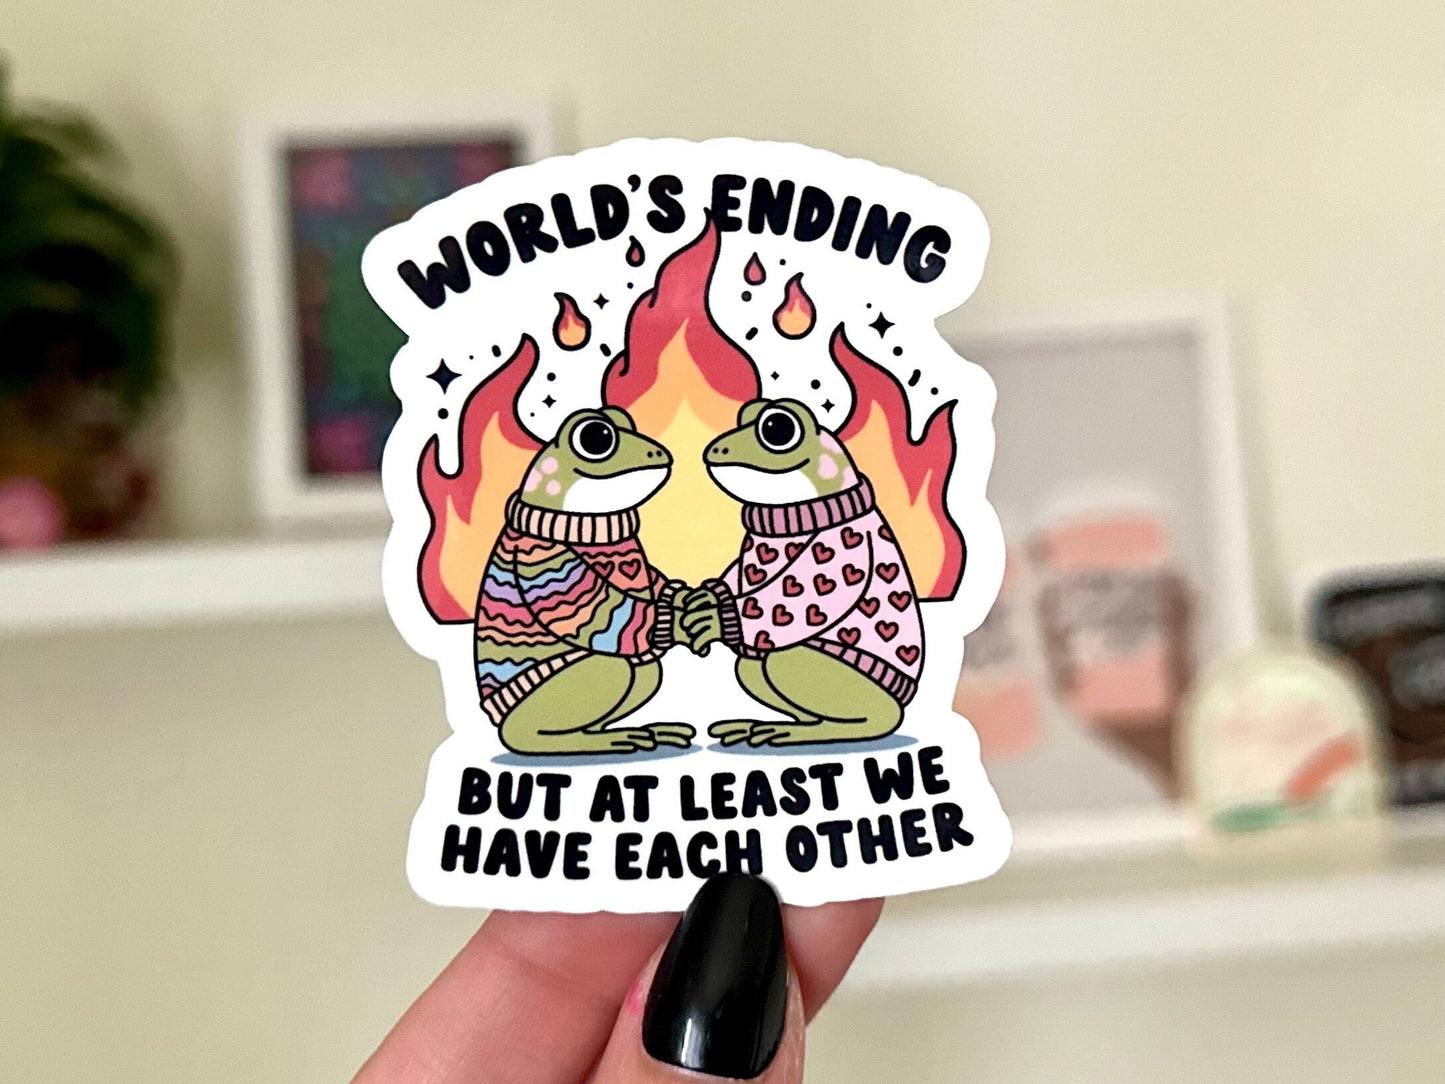 At Least We Have Each Other Waterproof Sticker, Self Care, Self Love, Mental Health Gifts, Valentines Day, Galentines, Anti Valentine